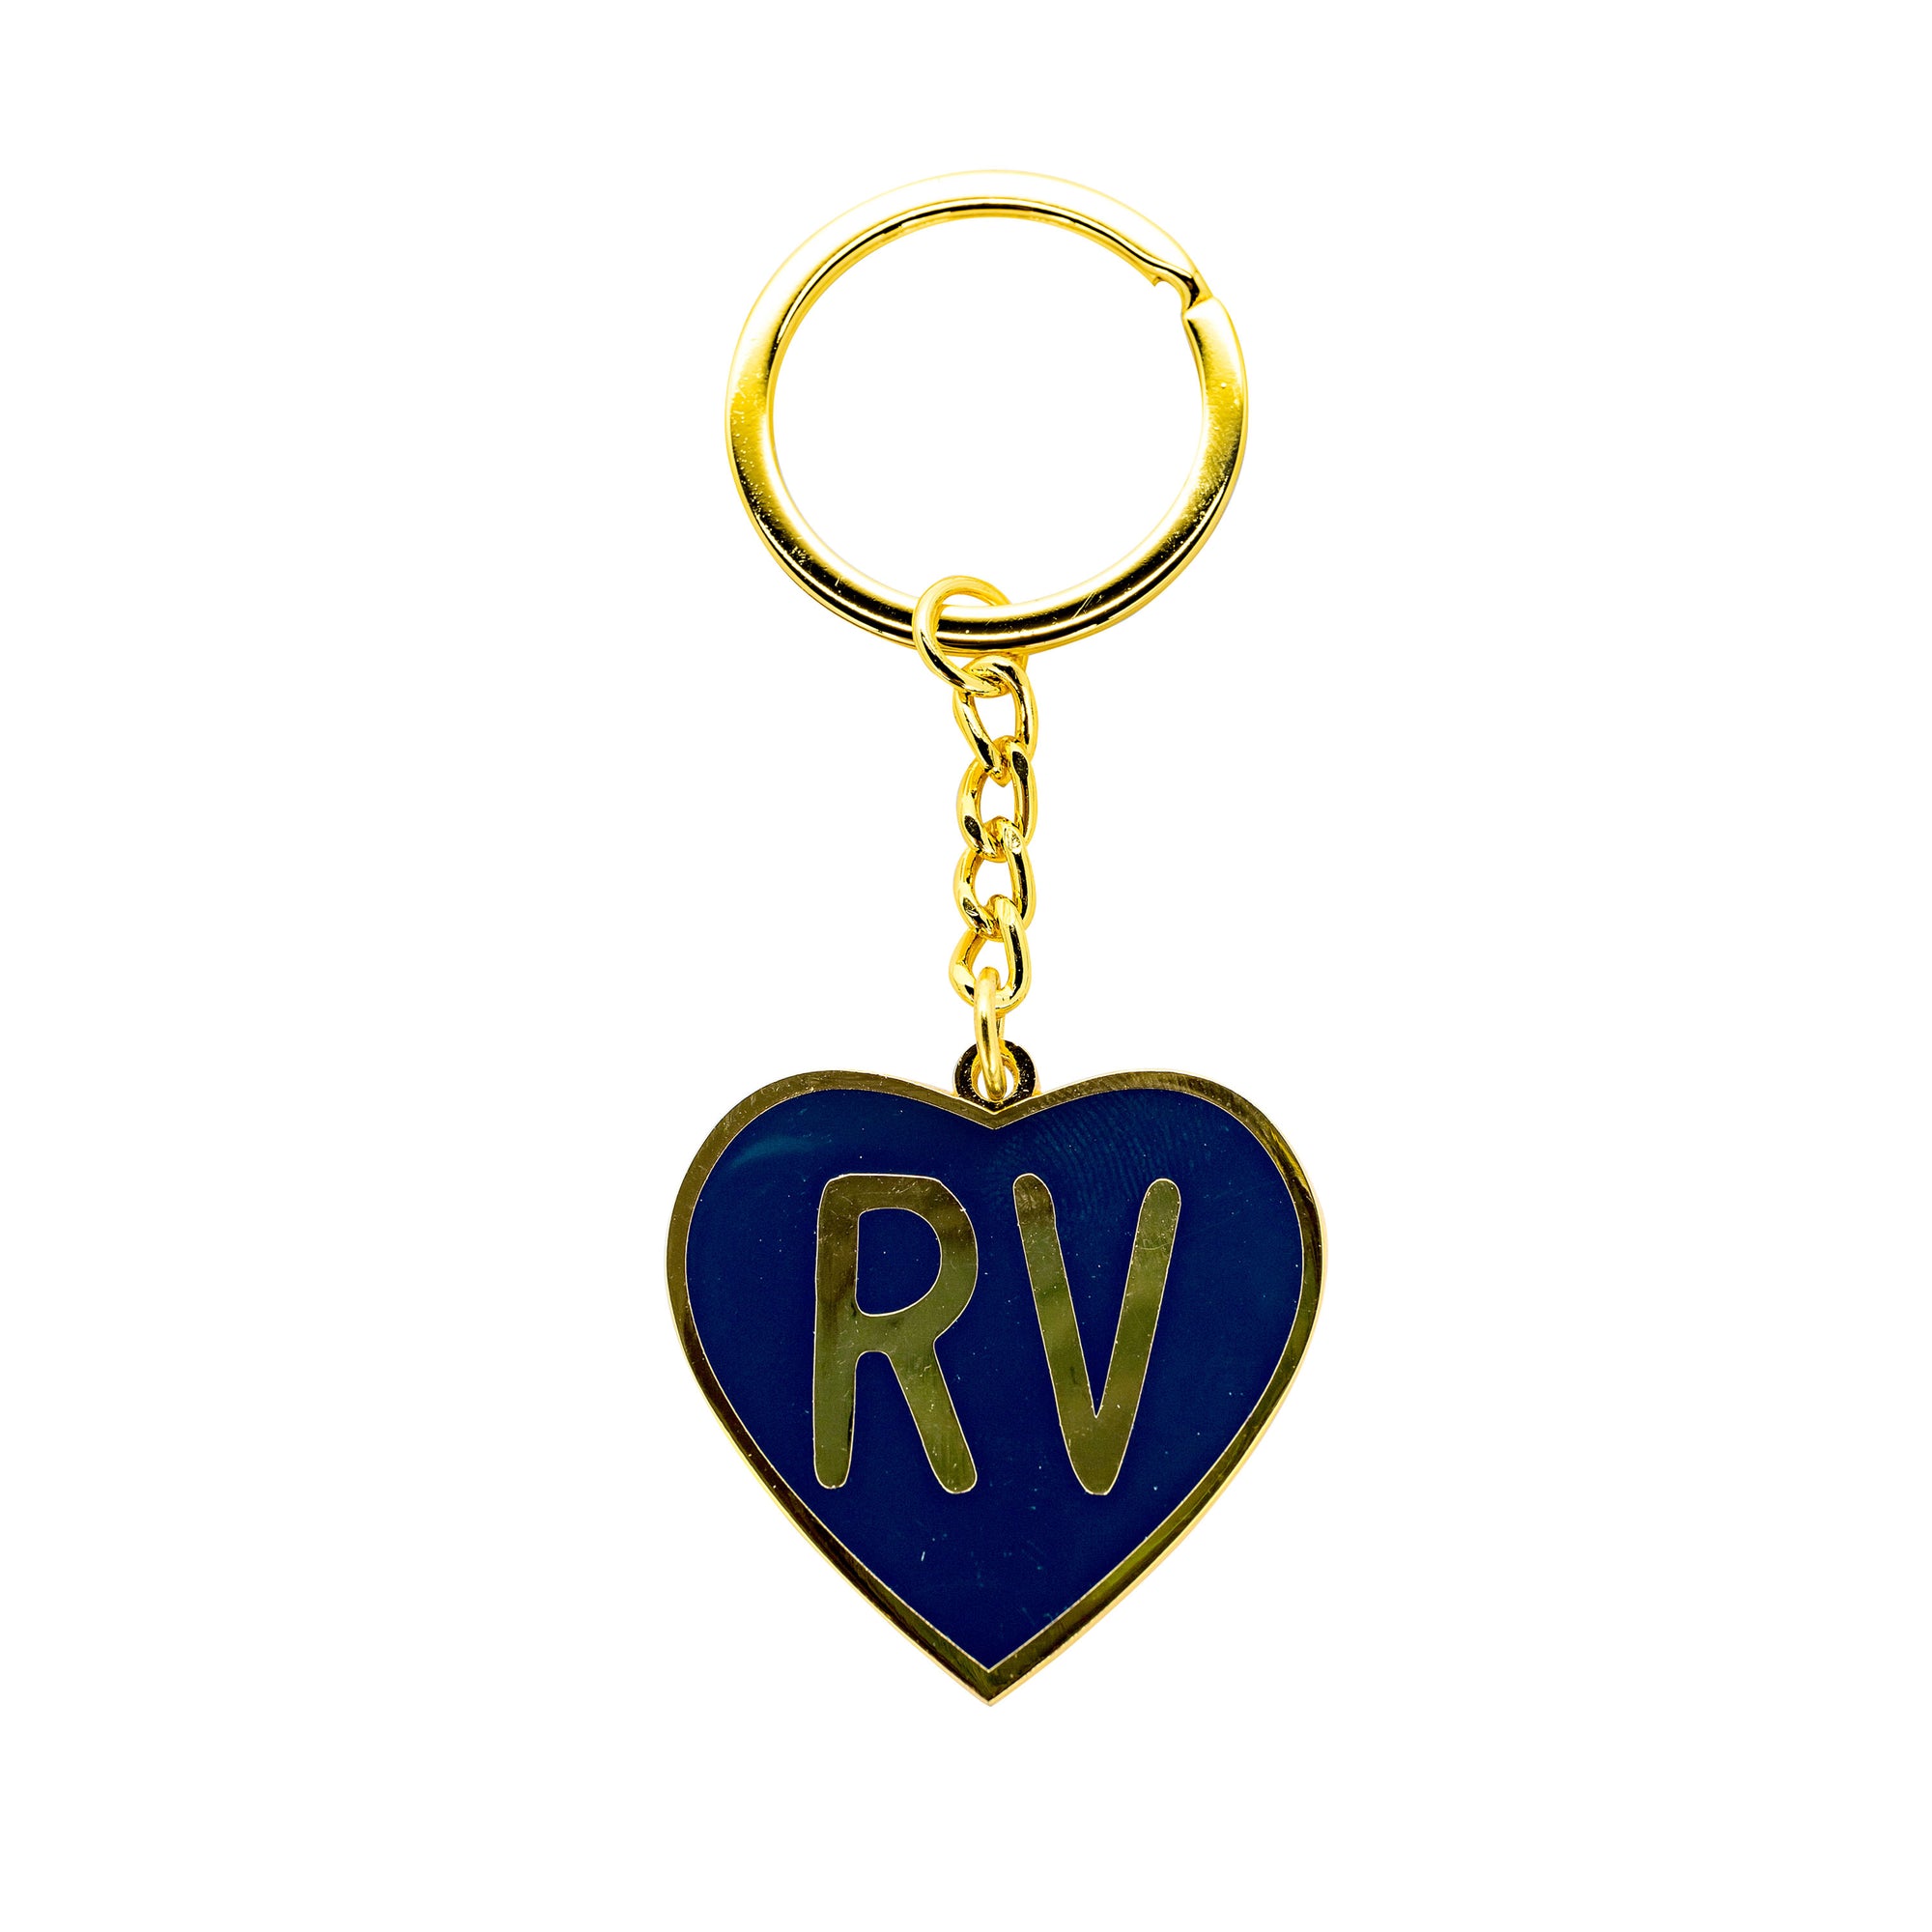 Camco 53288 "Life is Better at the Campsite" Keychain - Navy RV Heart